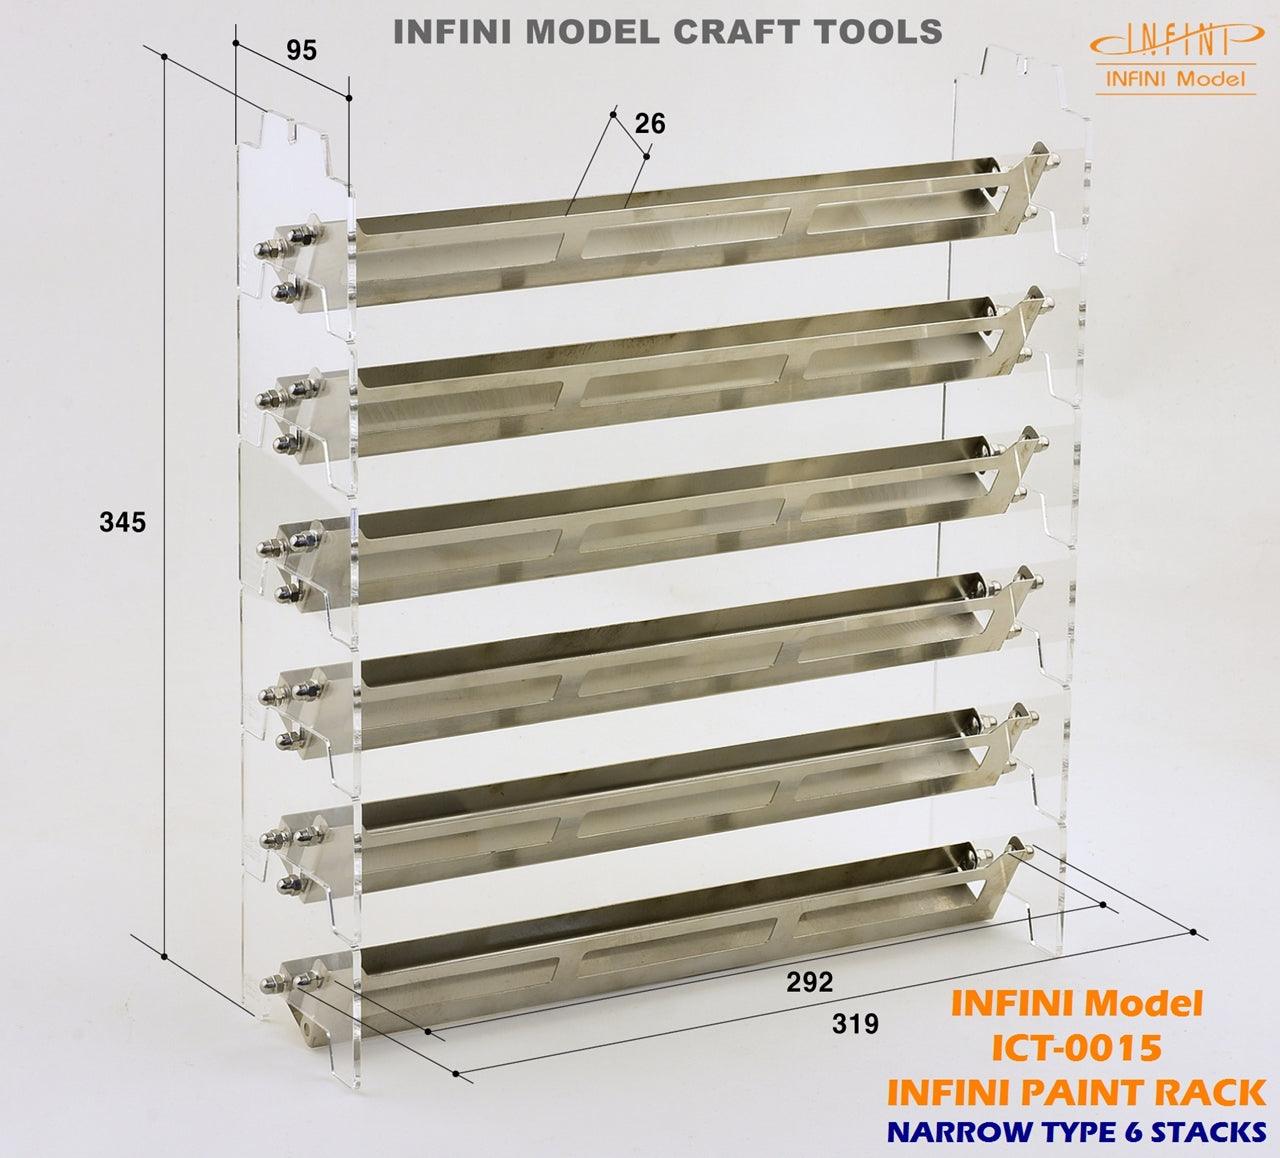 Infini Model Paint Rack Wide 6 Stacks ICT-0013 - A-Z Toy Hobby